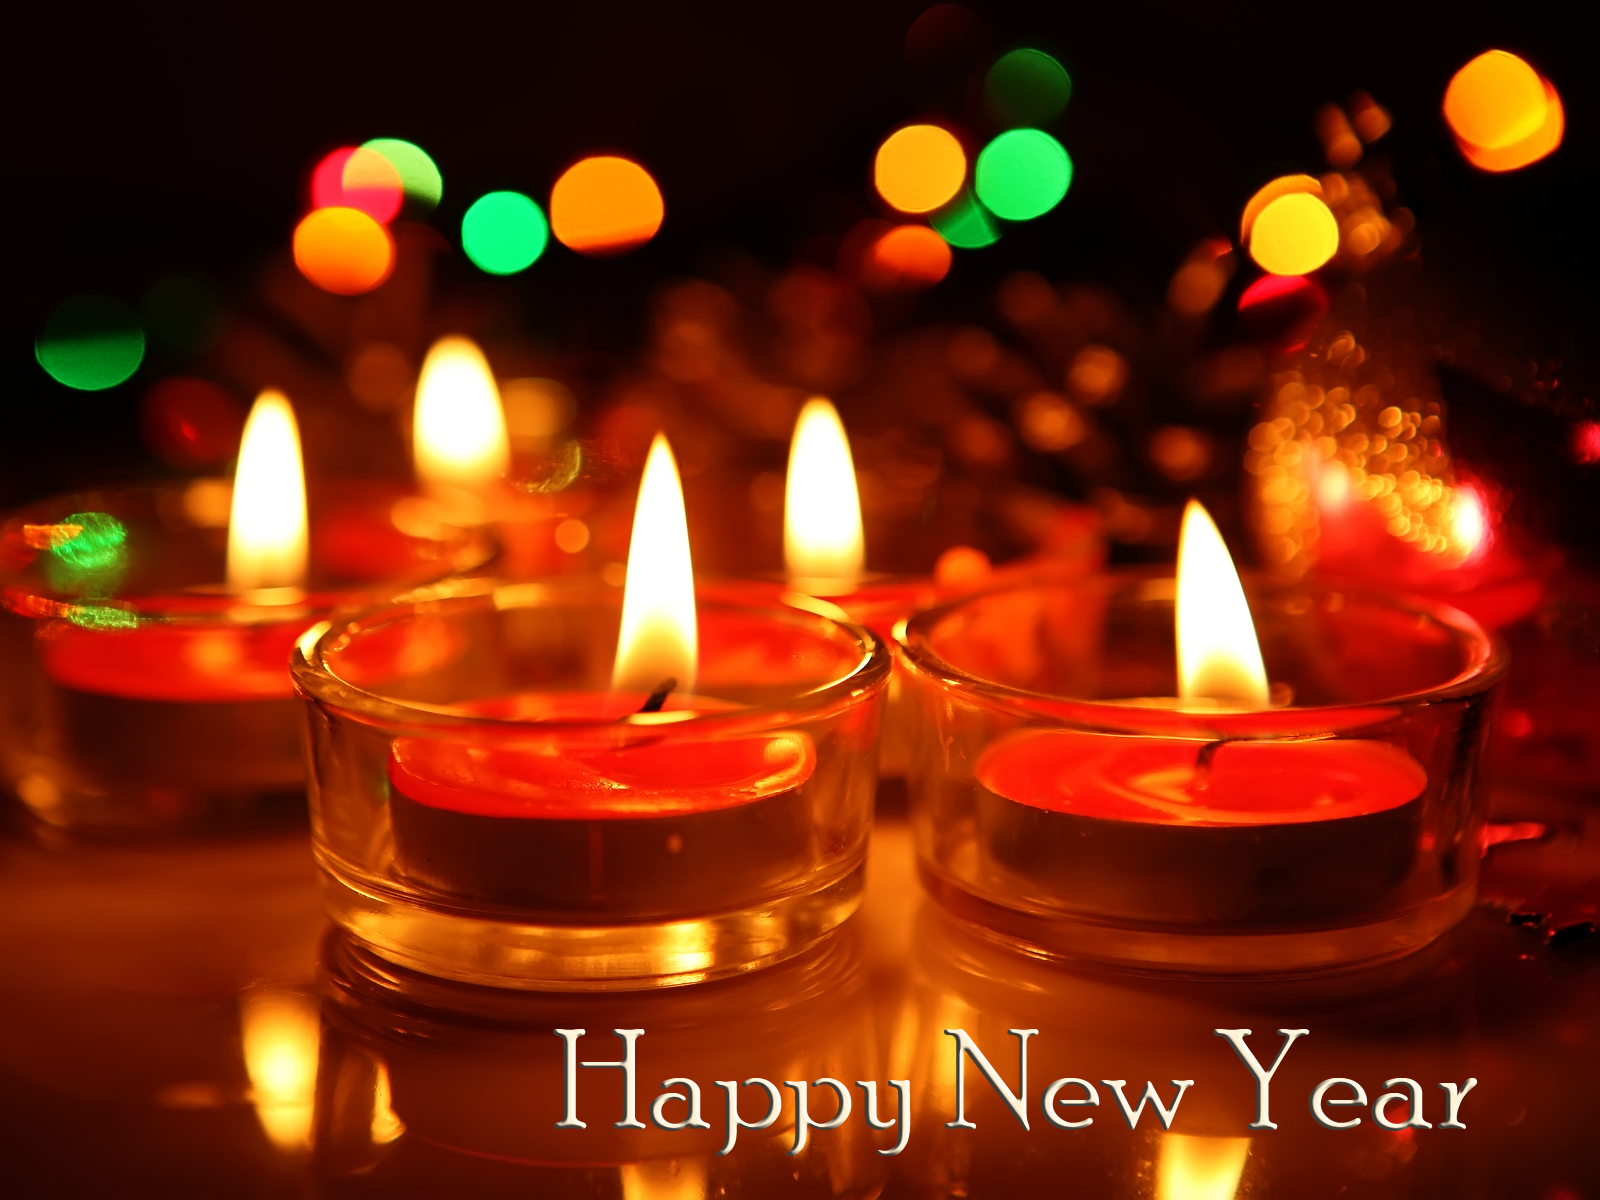 happy new year 2015 images with candels